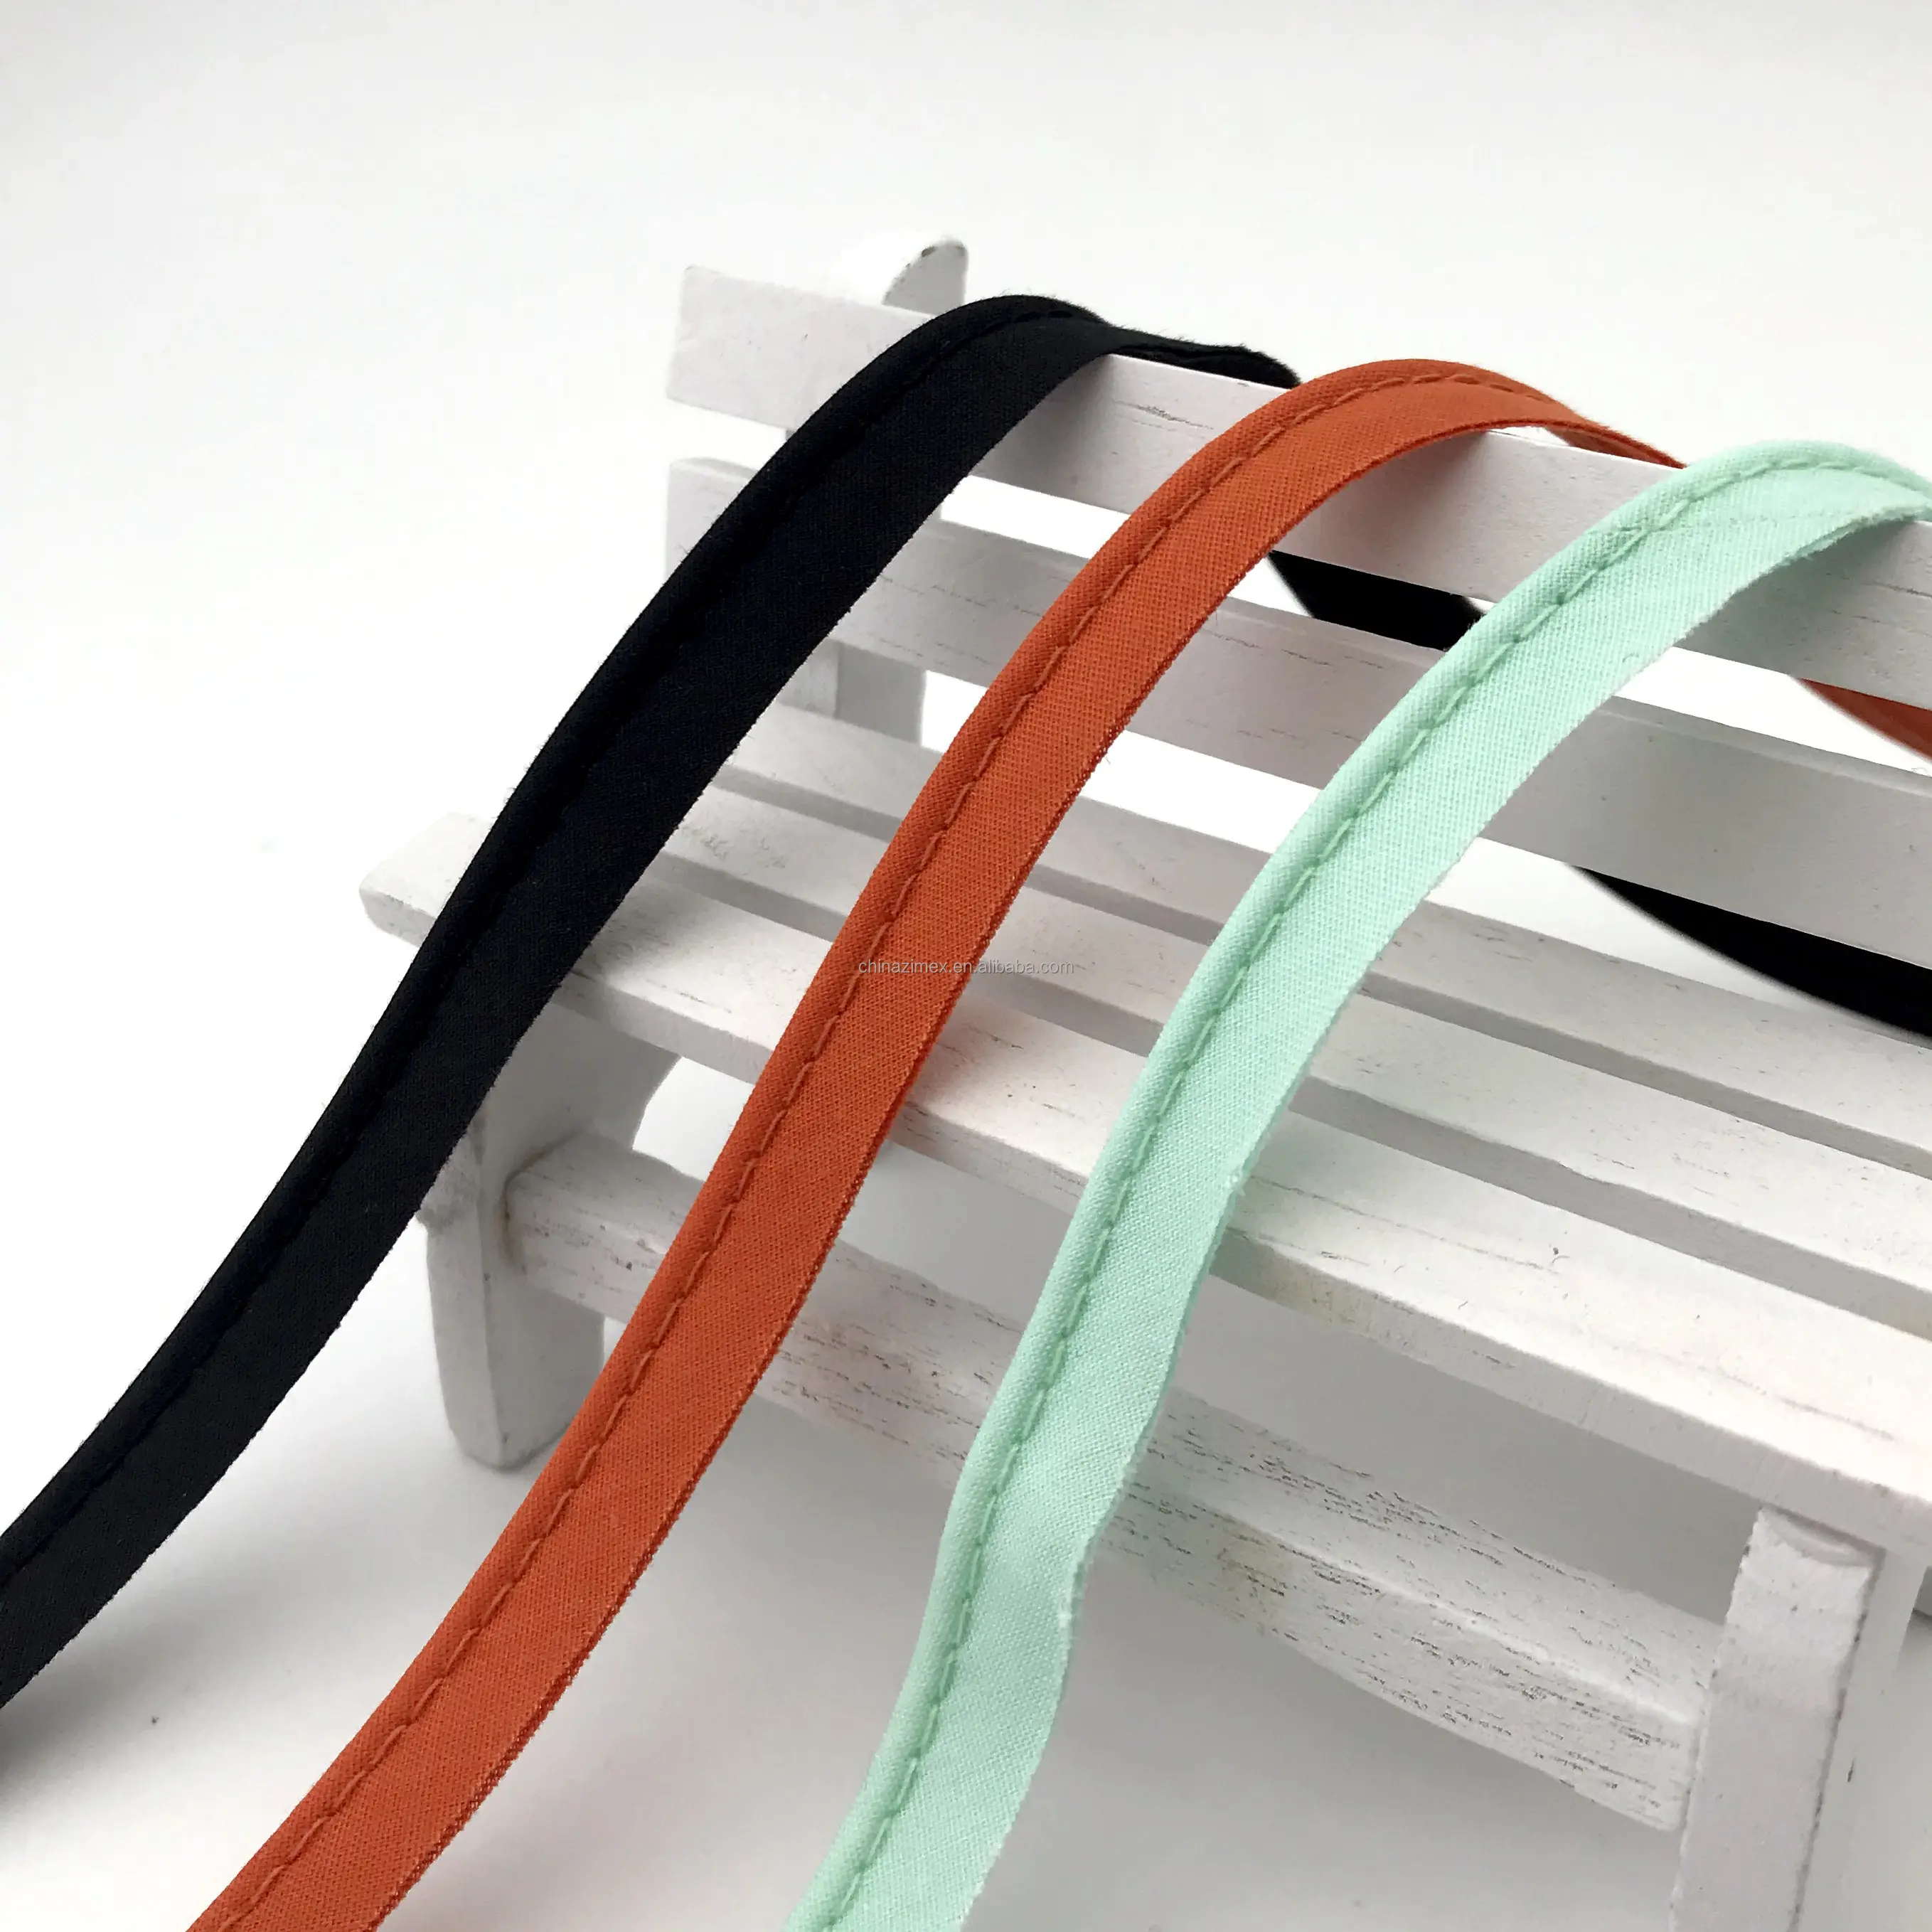 10mm high quality polyester/cotton bias piping piping tape for home textile products